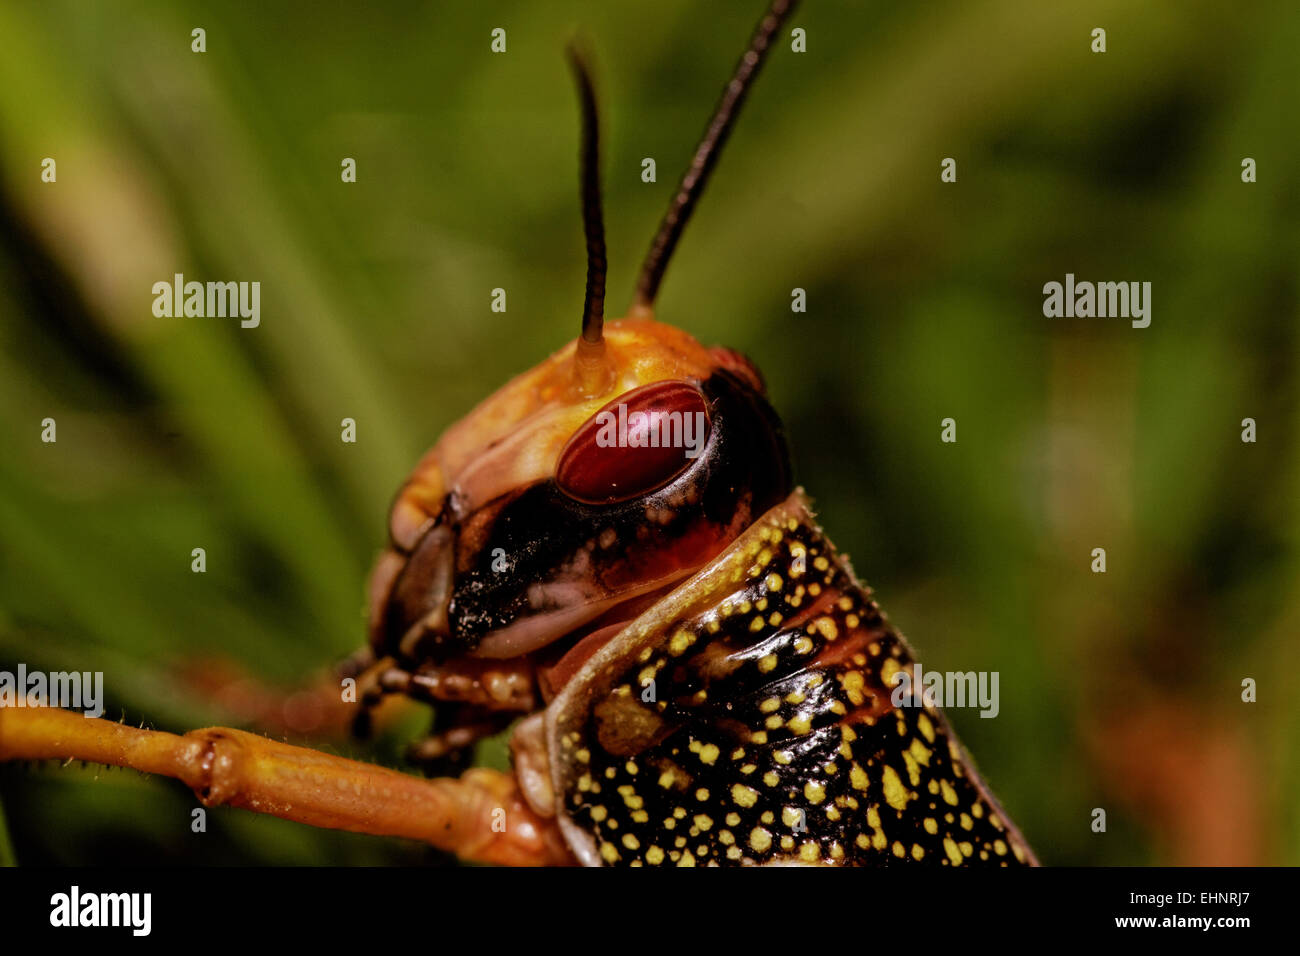 one locust eating the grass in the nature Stock Photo